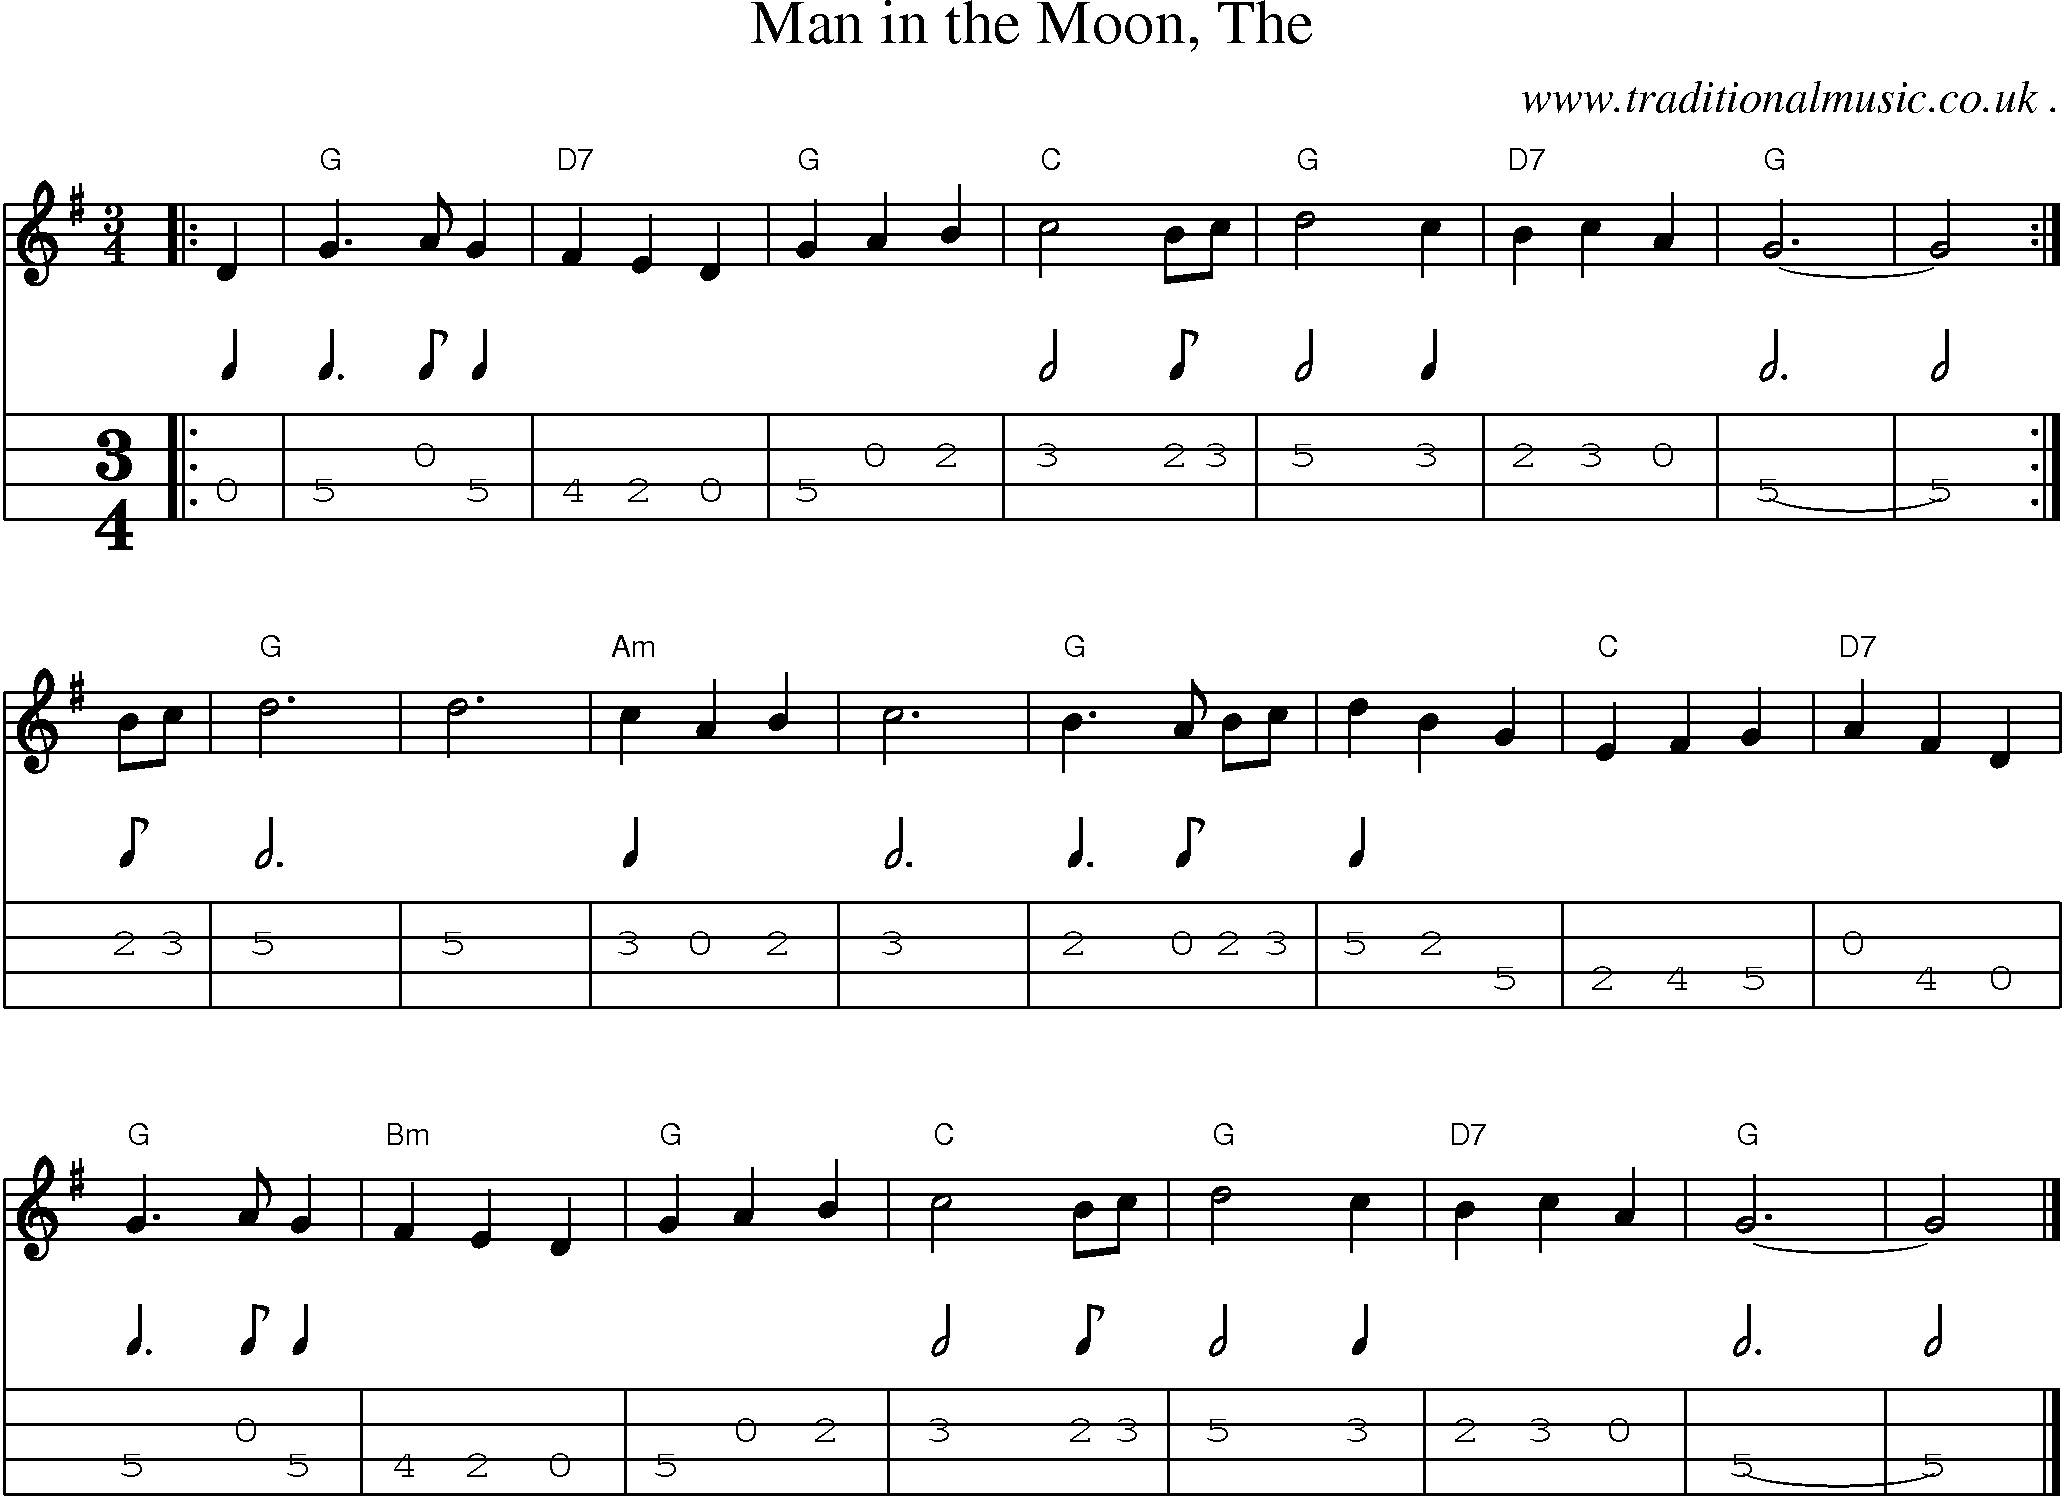 Music Score and Guitar Tabs for Man in the Moon The